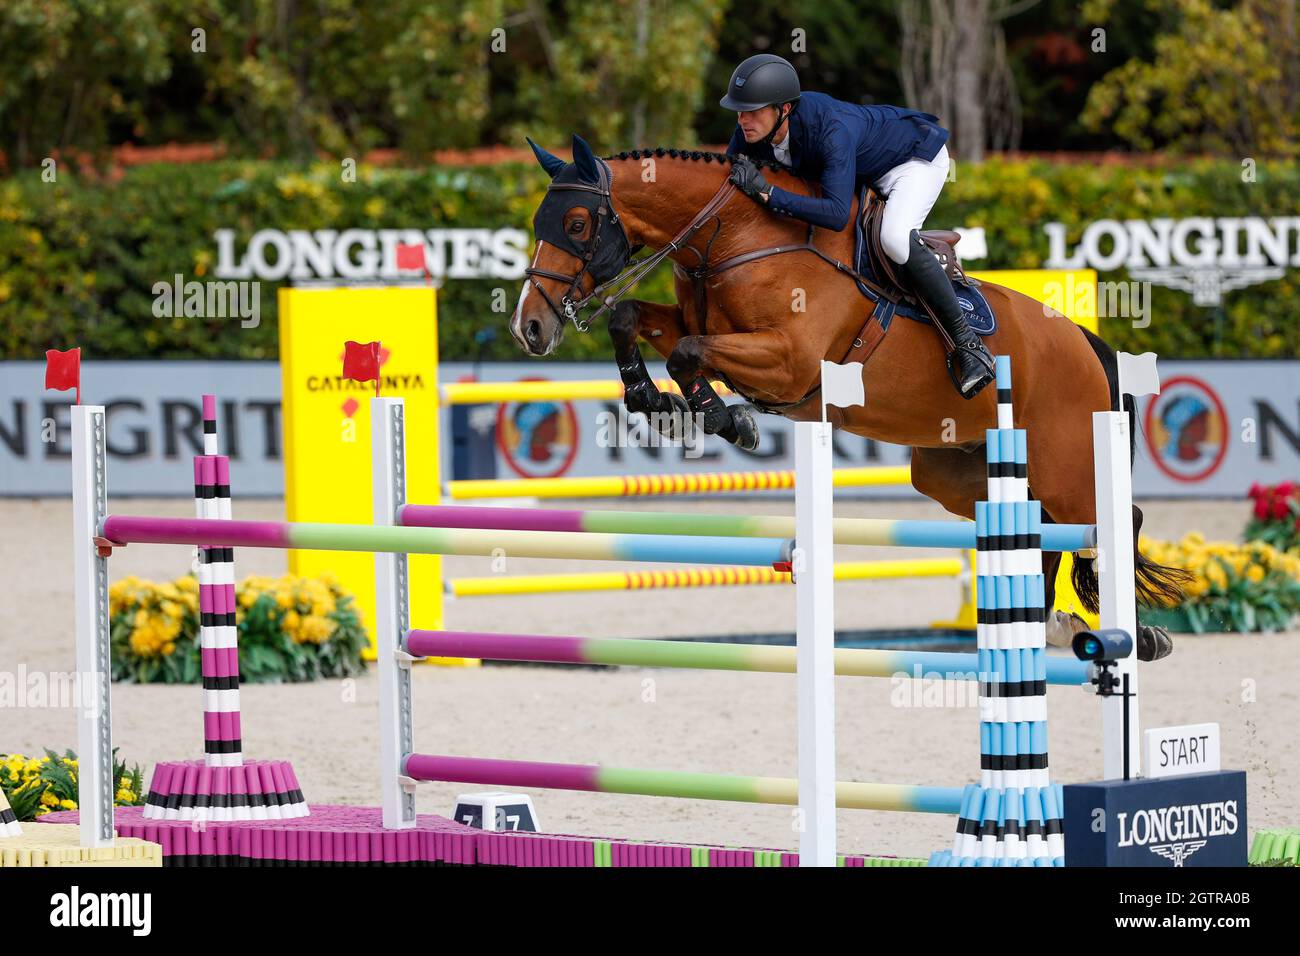 Gregory Wathelet of Belgium riding Indago during the CSIO Barcelona: Longines FEI jumping Nations Cup at Real Club de Polo of Barcelona. Stock Photo